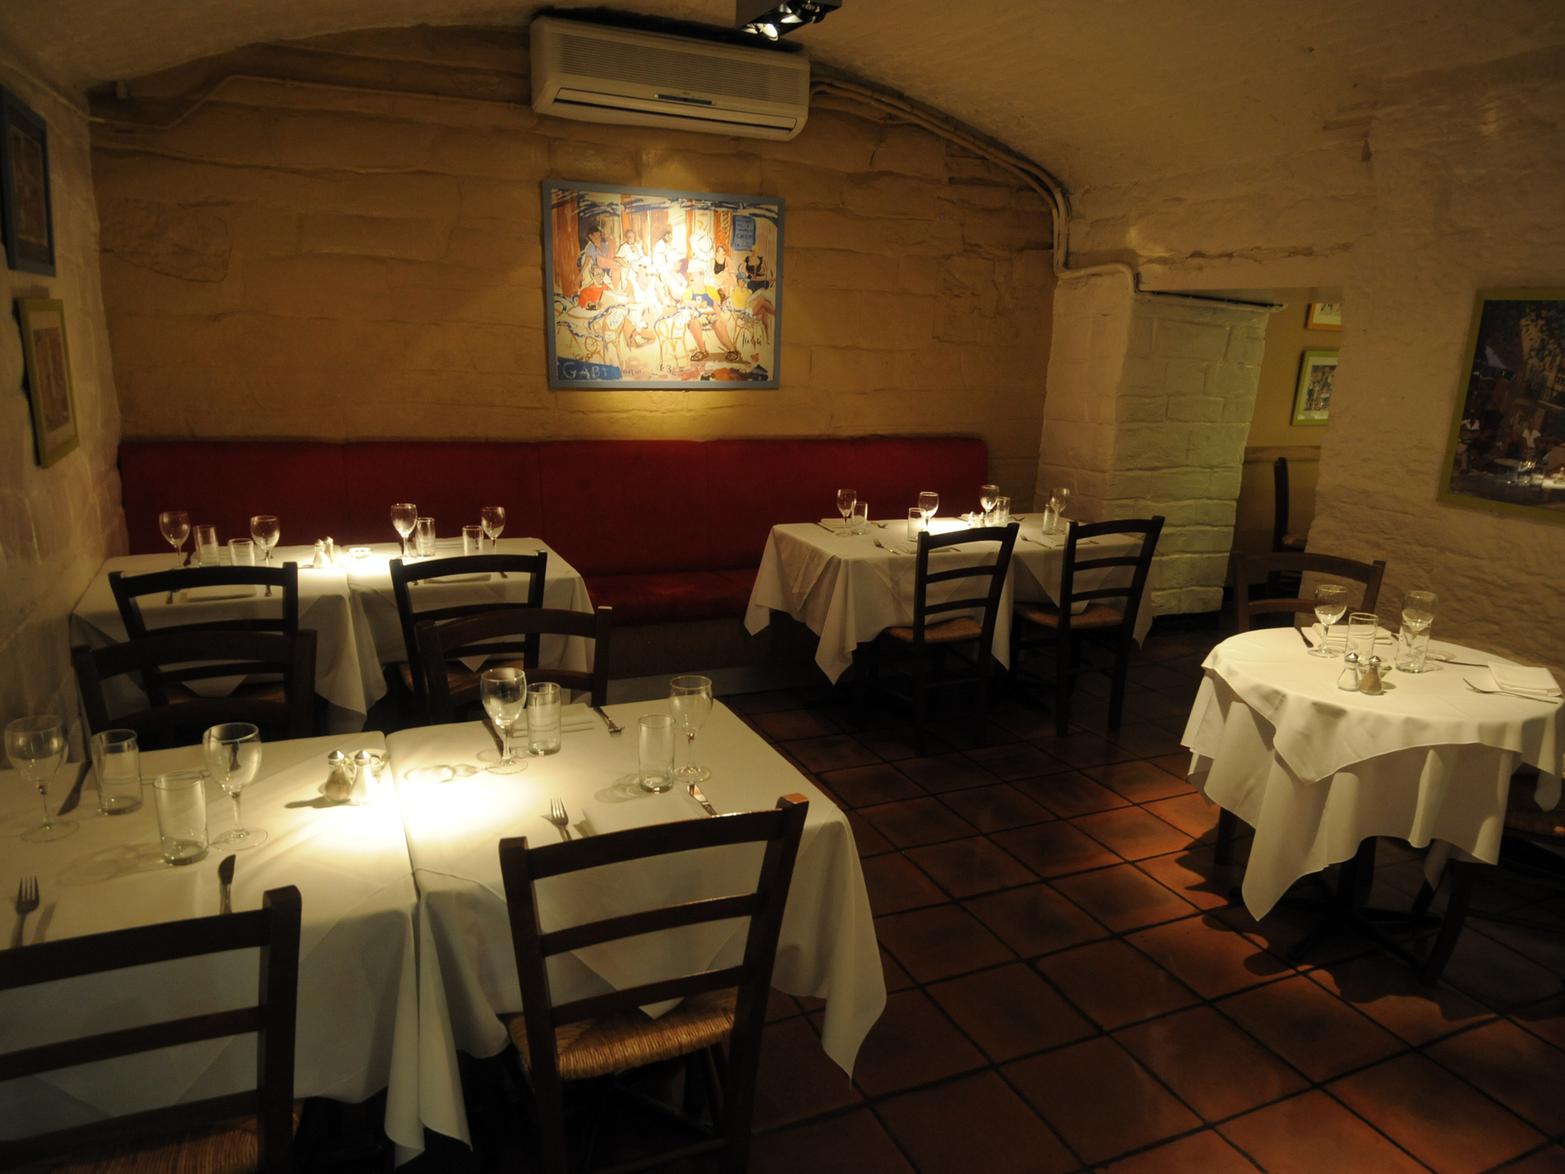 Do you remember this restaurant tucked away in a charming vaulted basement on Wellington Street? It aimed to provide diners with a little taste of France on their doorstep.